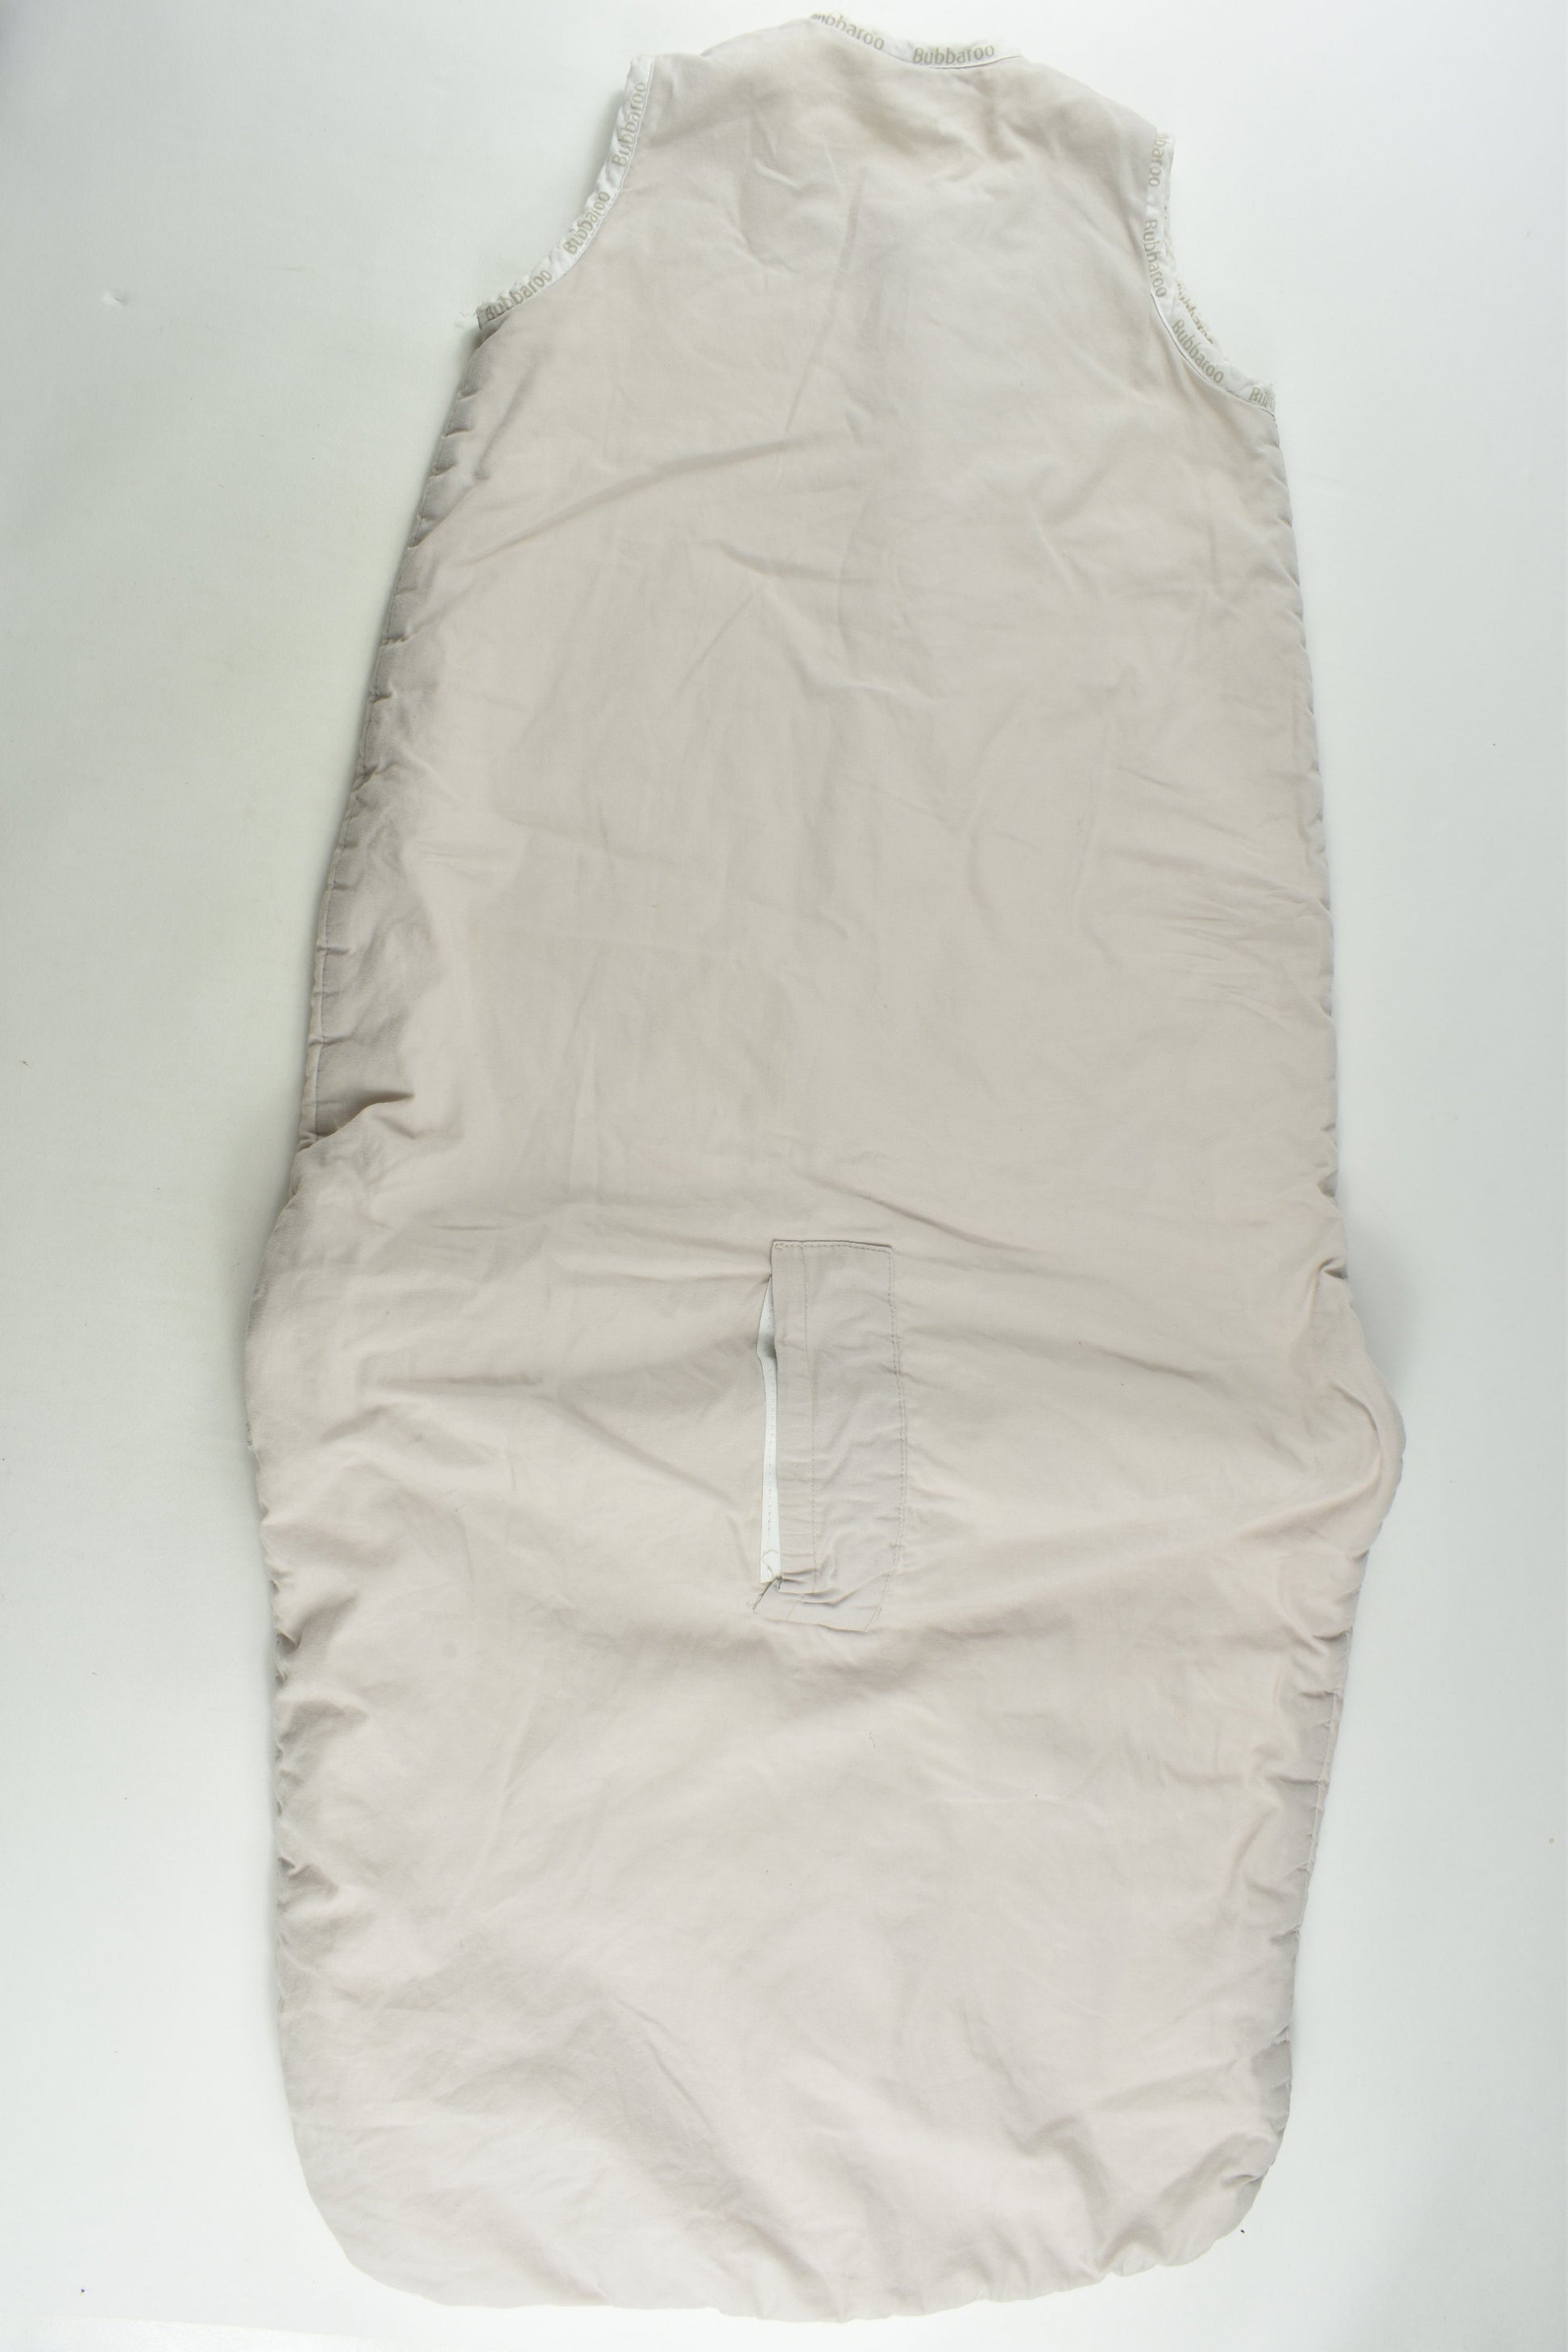 Bubbaroo Size 6-18 months Approx 1.5 TOG Sleeping Bag